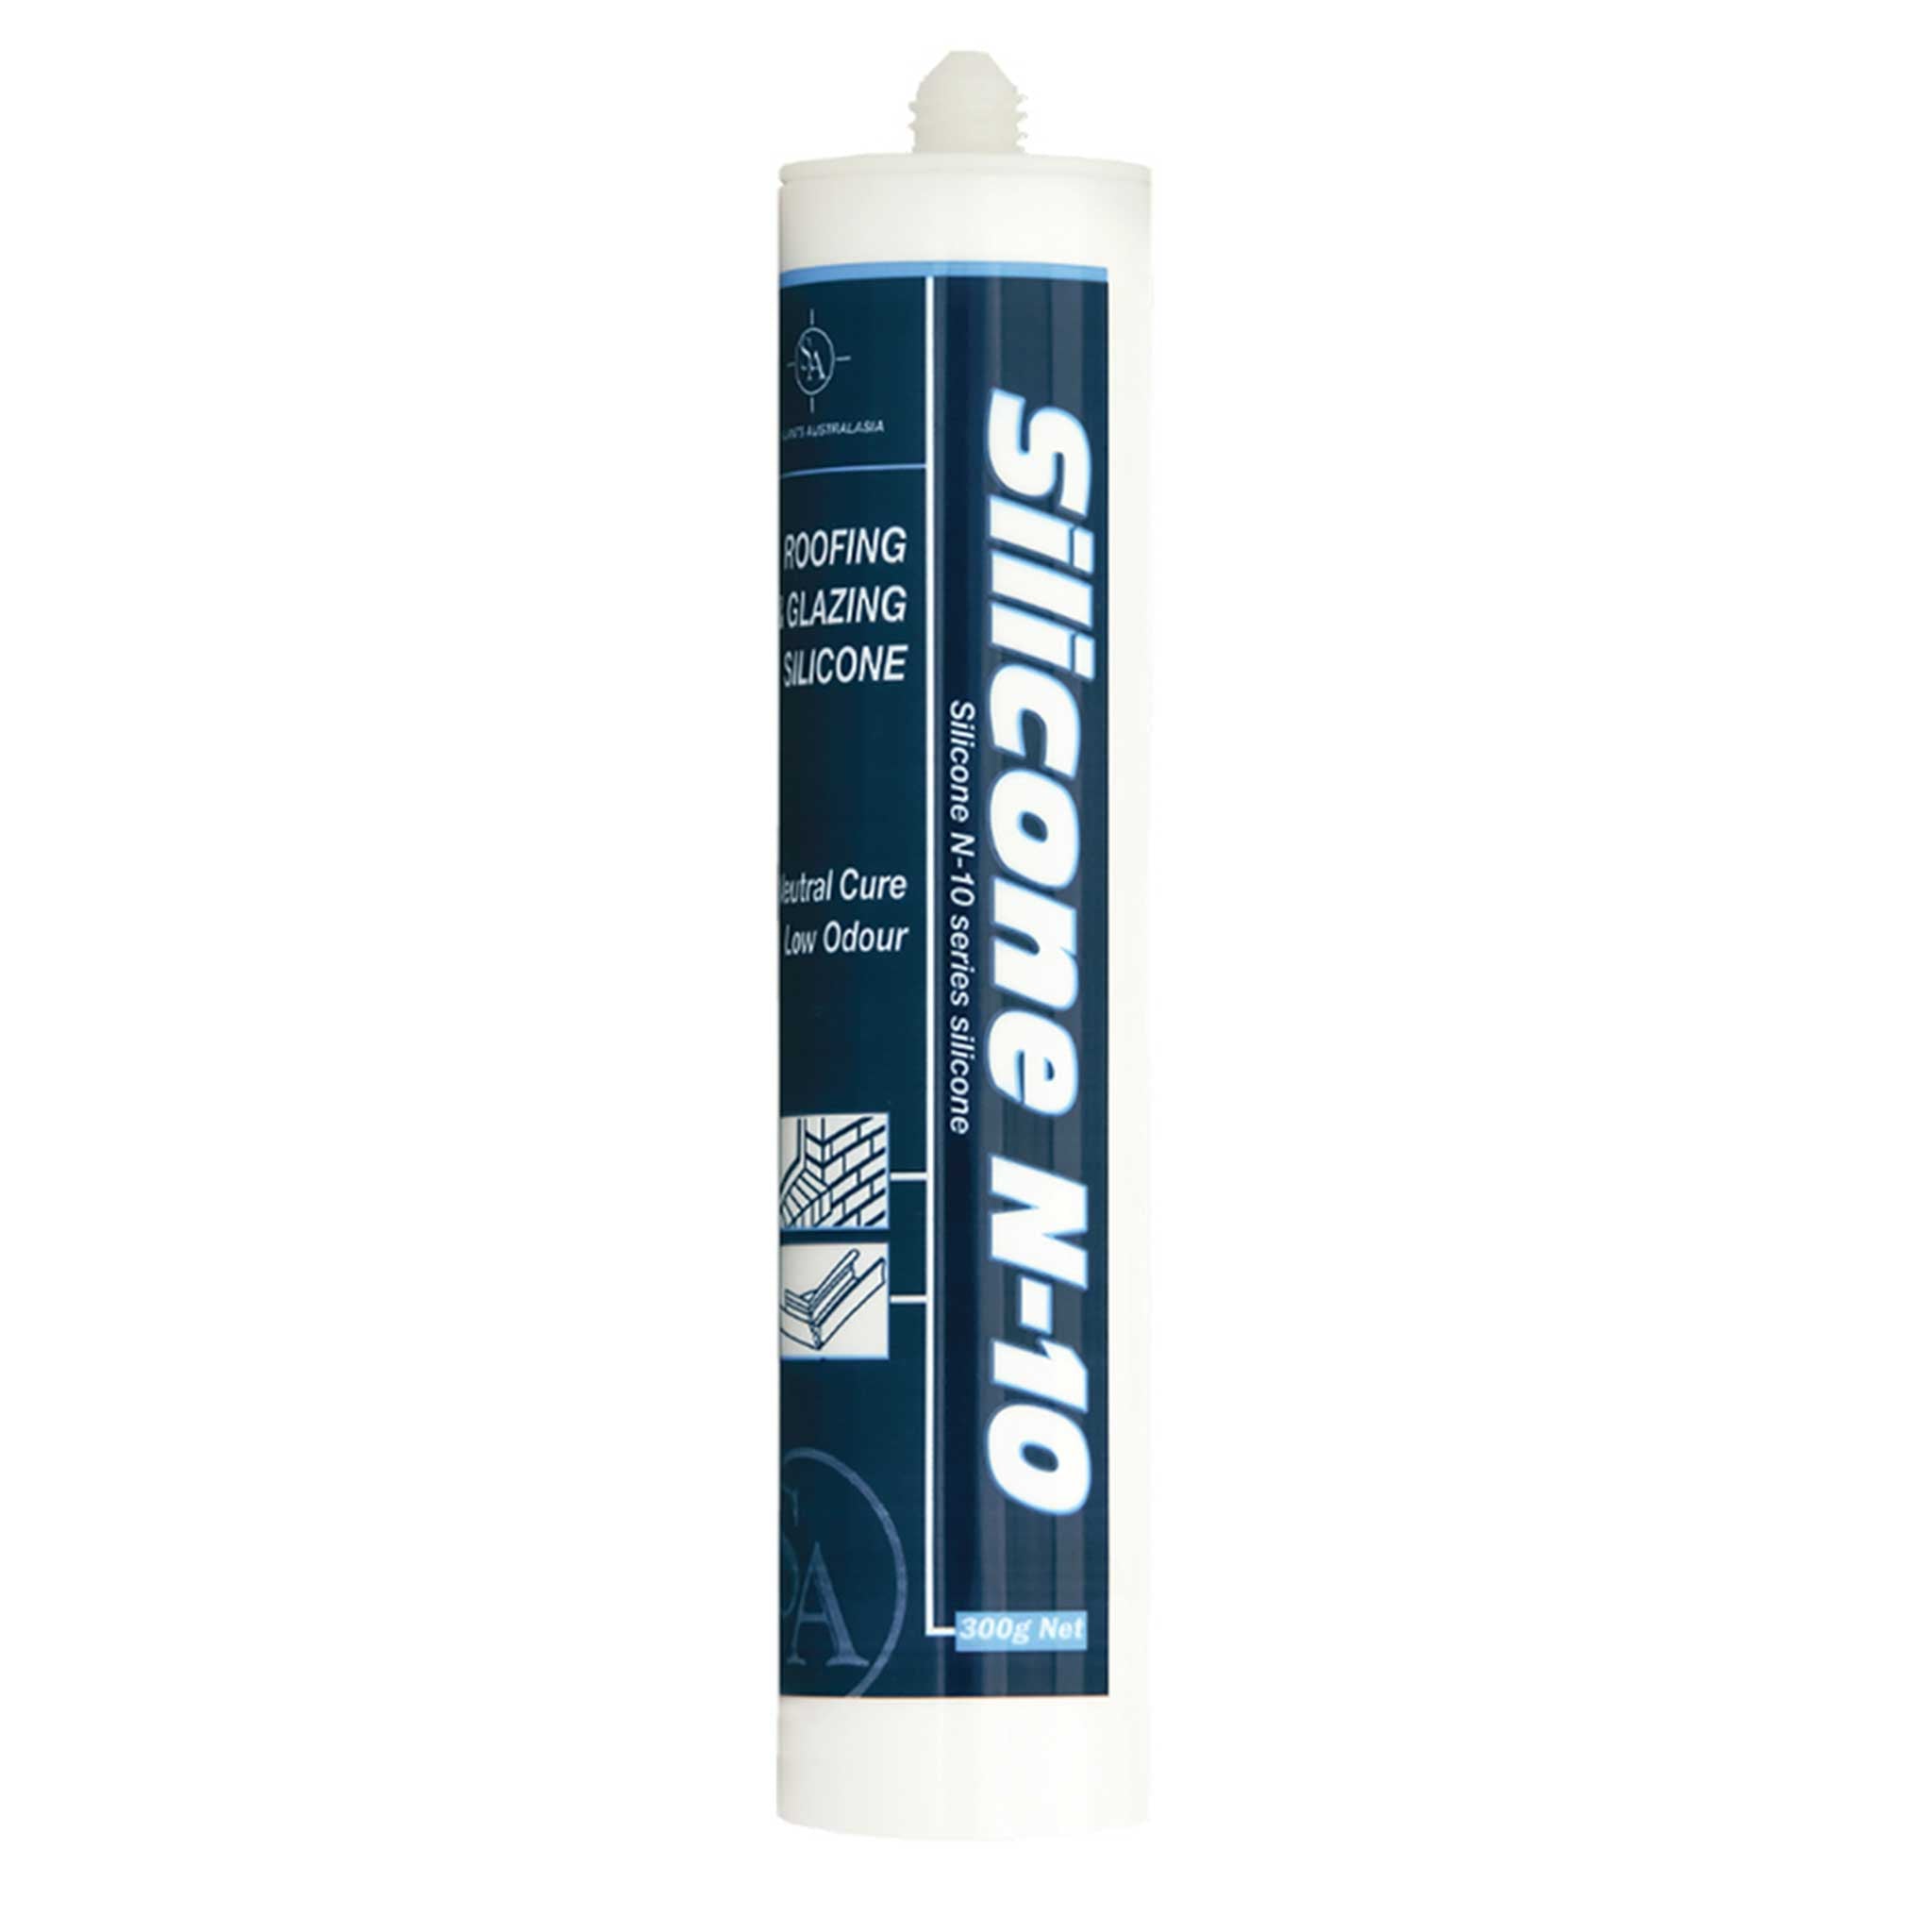 Silicone N-10 - Neutral Cure Silicone Adhesive for Glazing and